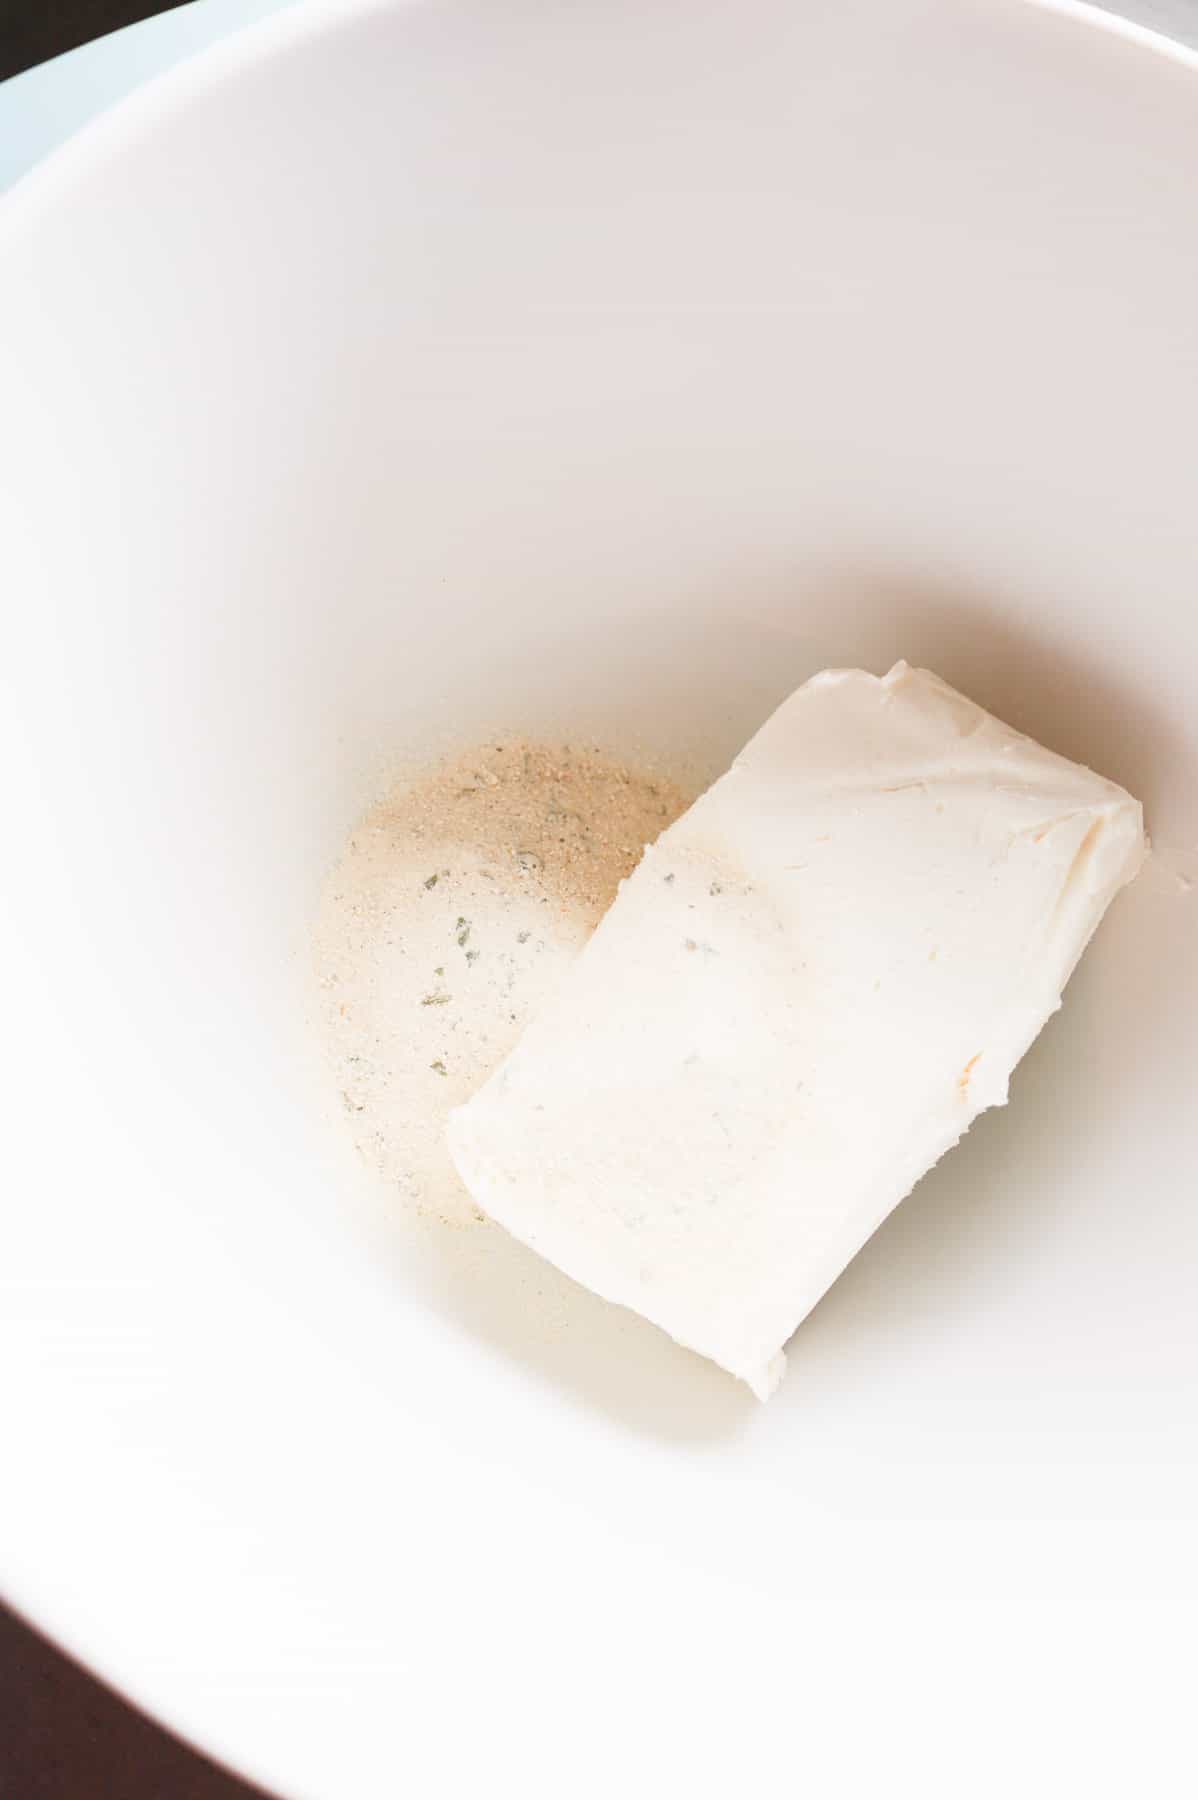 cream cheese, ranch dressing mix and milk in a mixing bowl